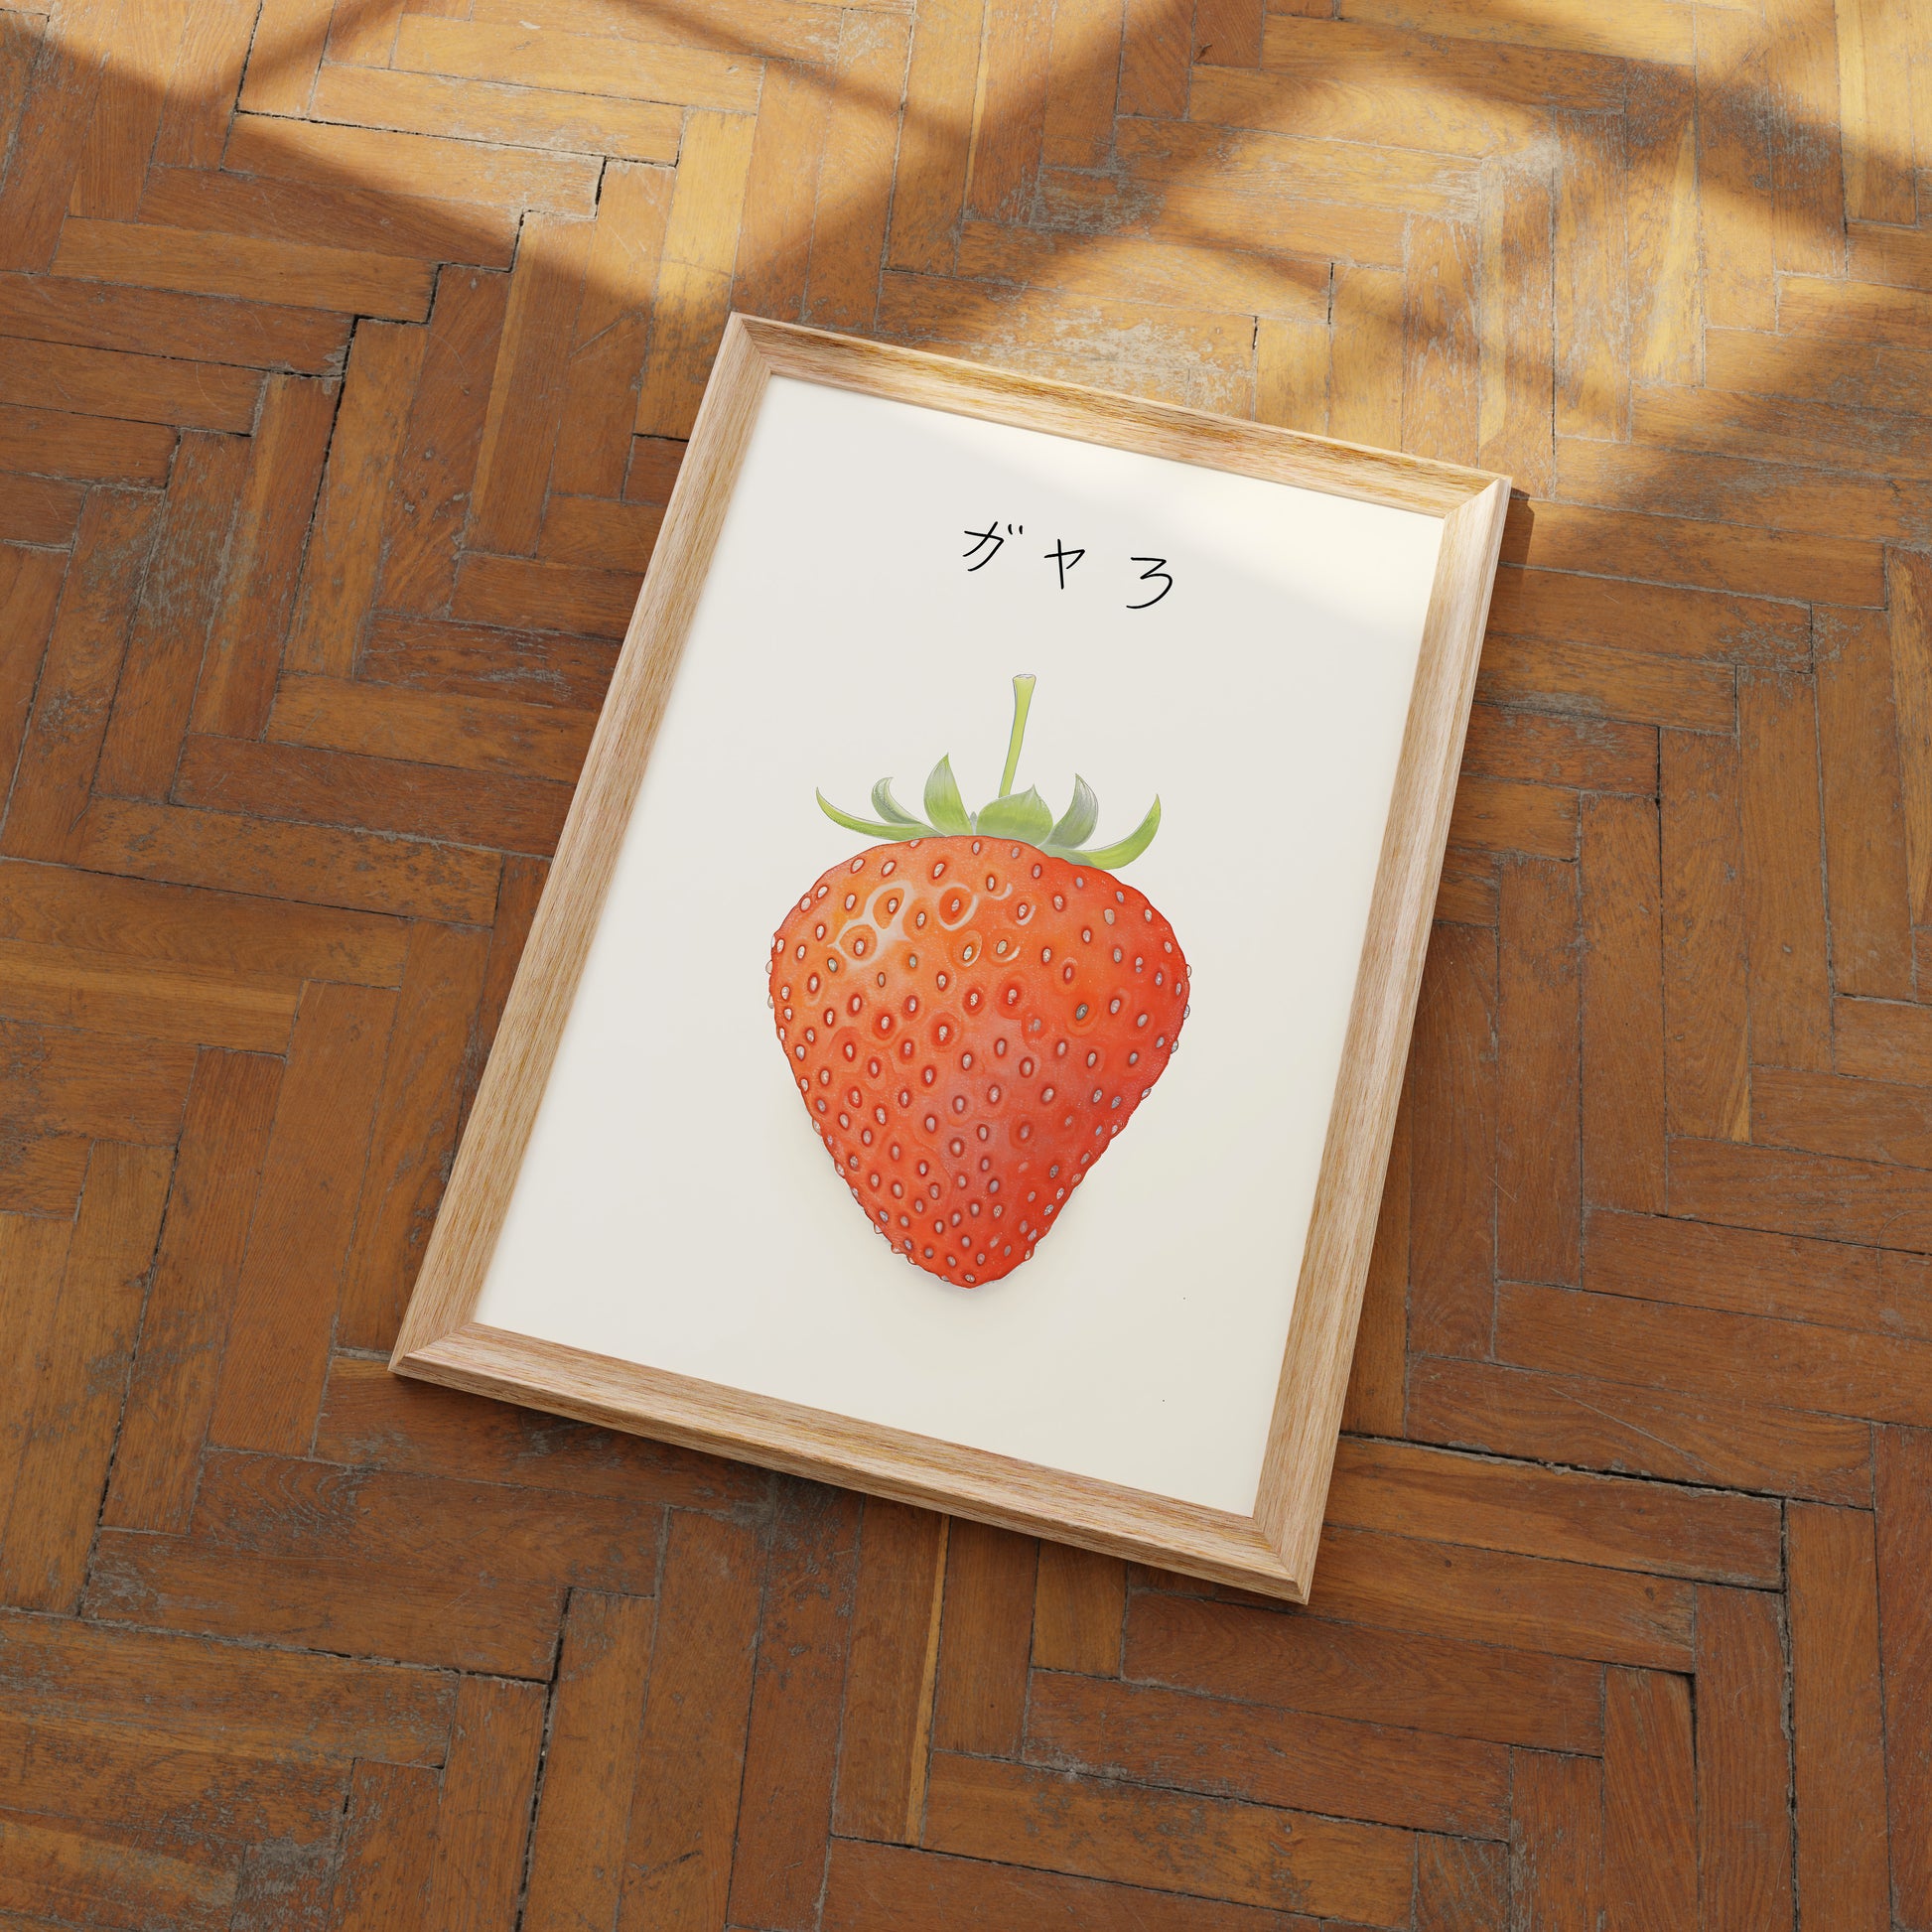 A framed illustration of a strawberry on a wooden floor.